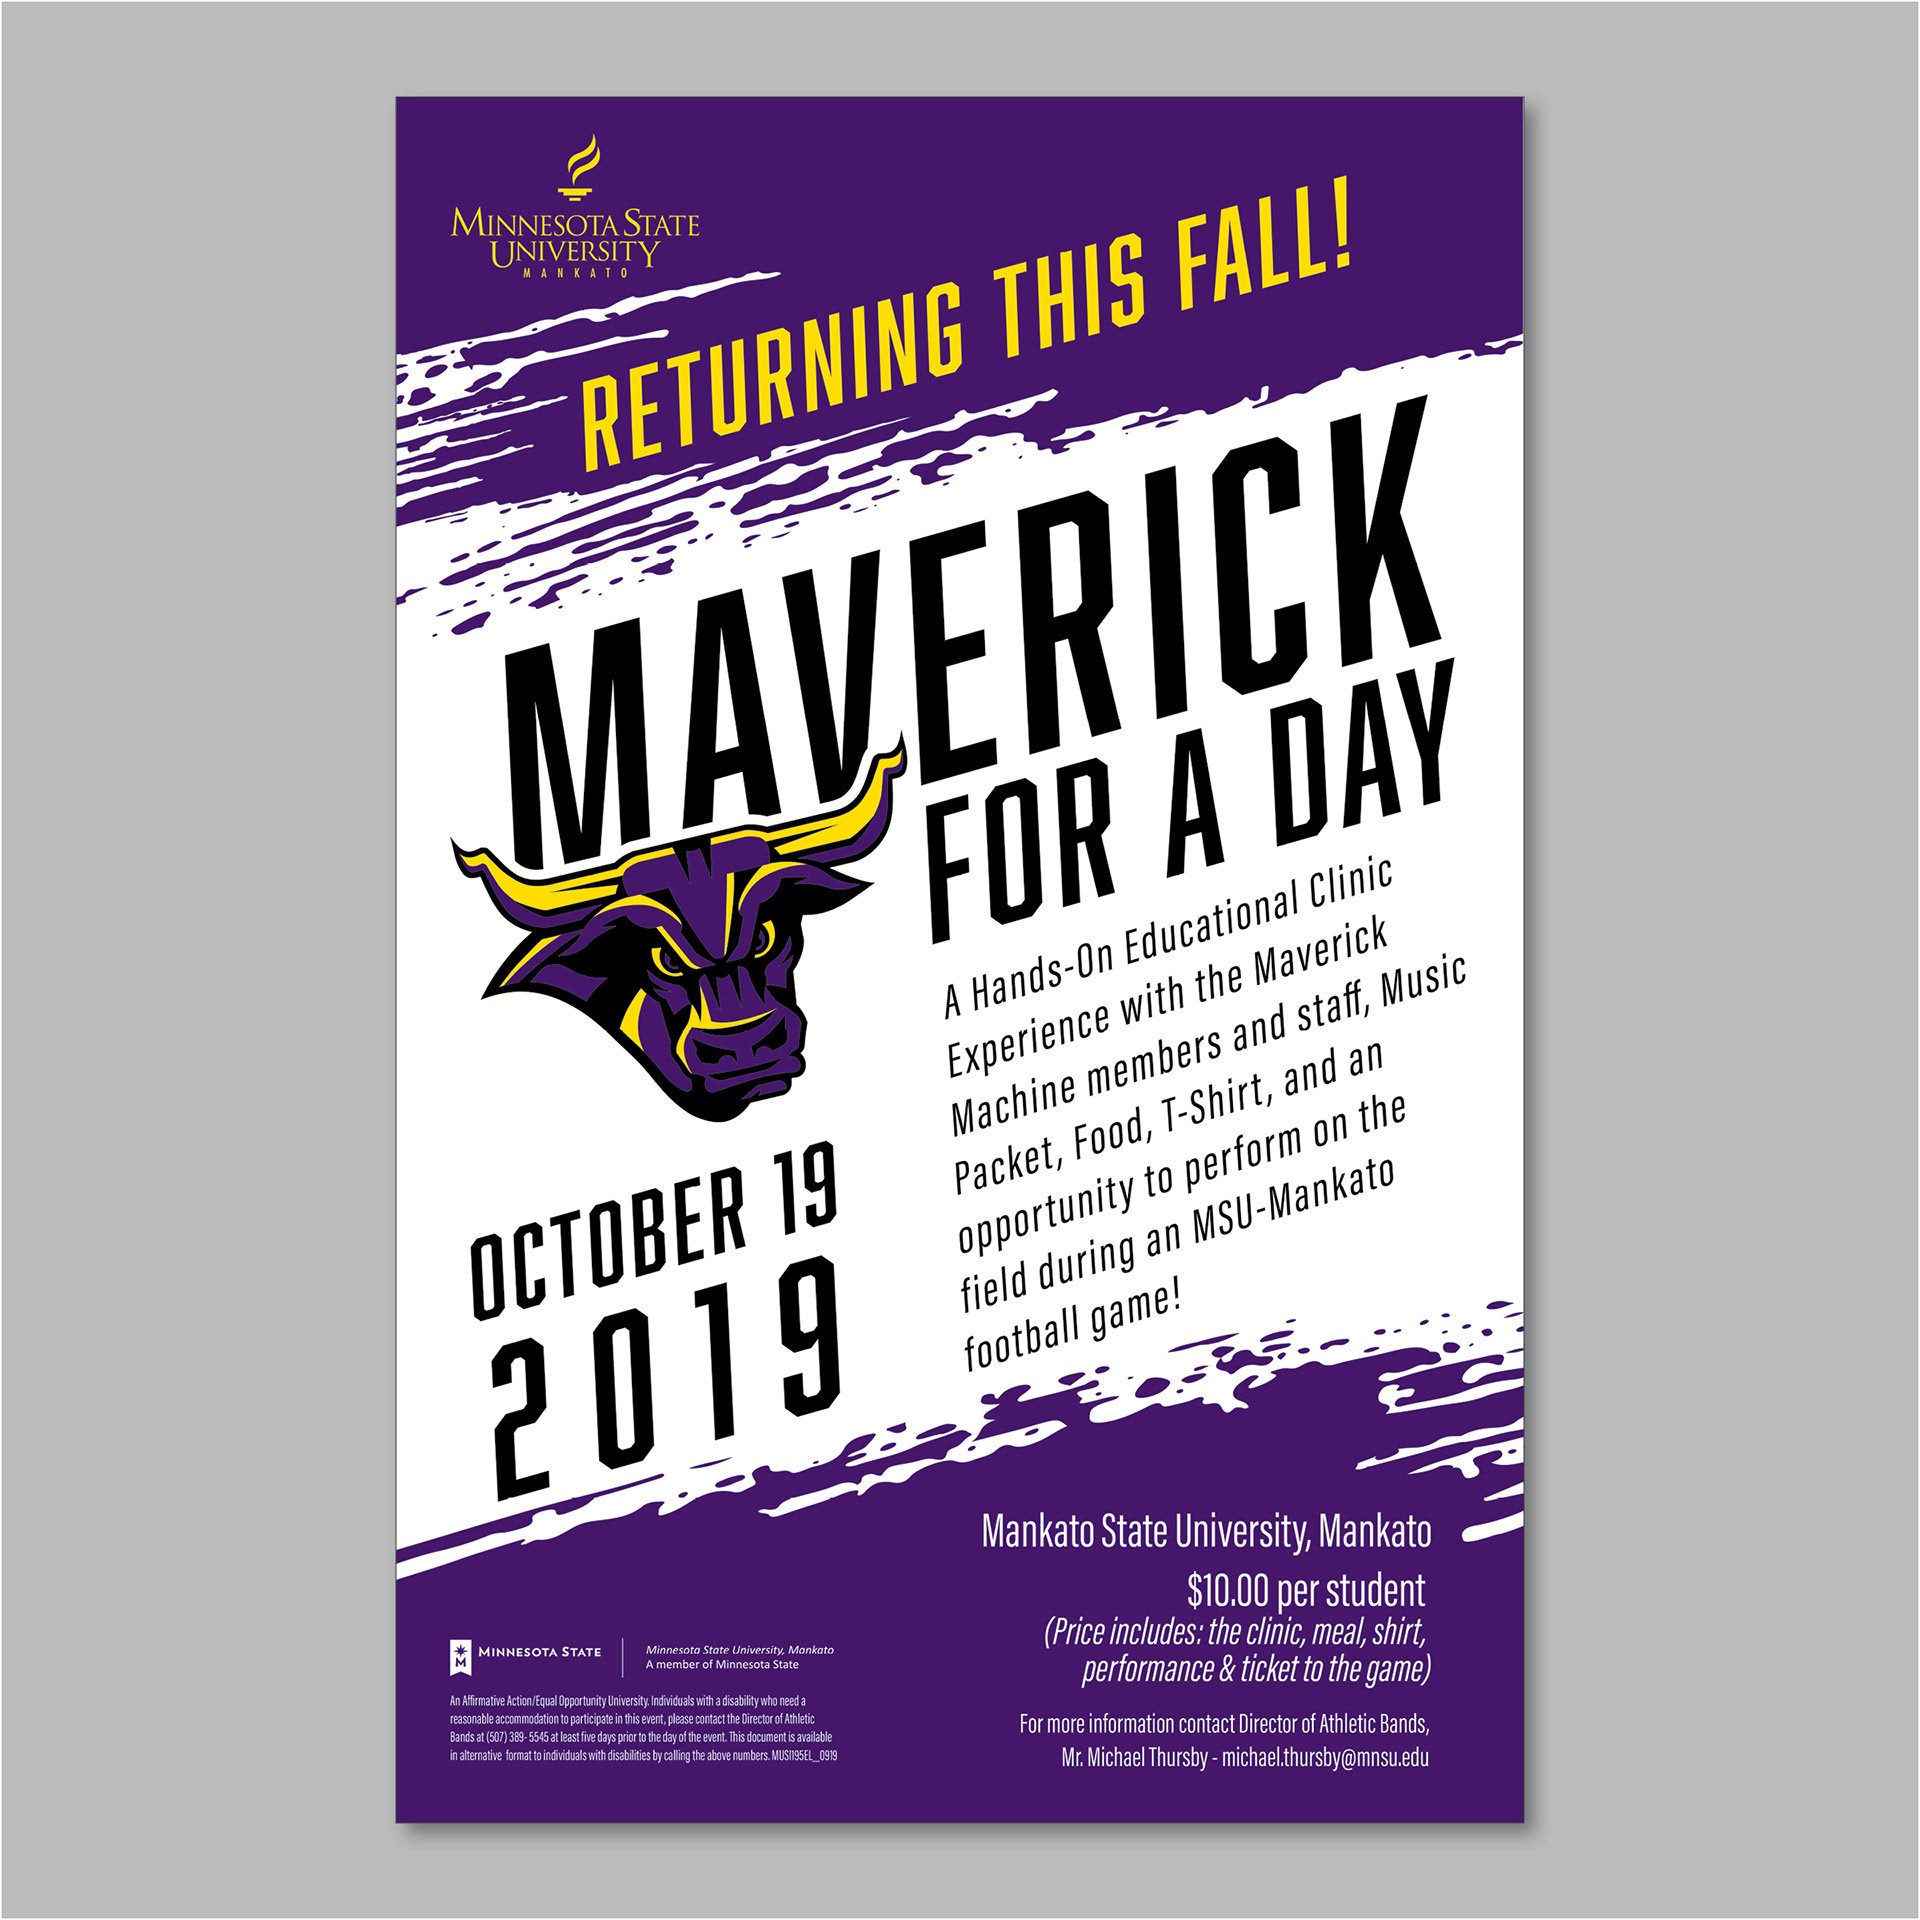 Maverick for a day, a hands-on educational clinic experience with maverick machine member poster